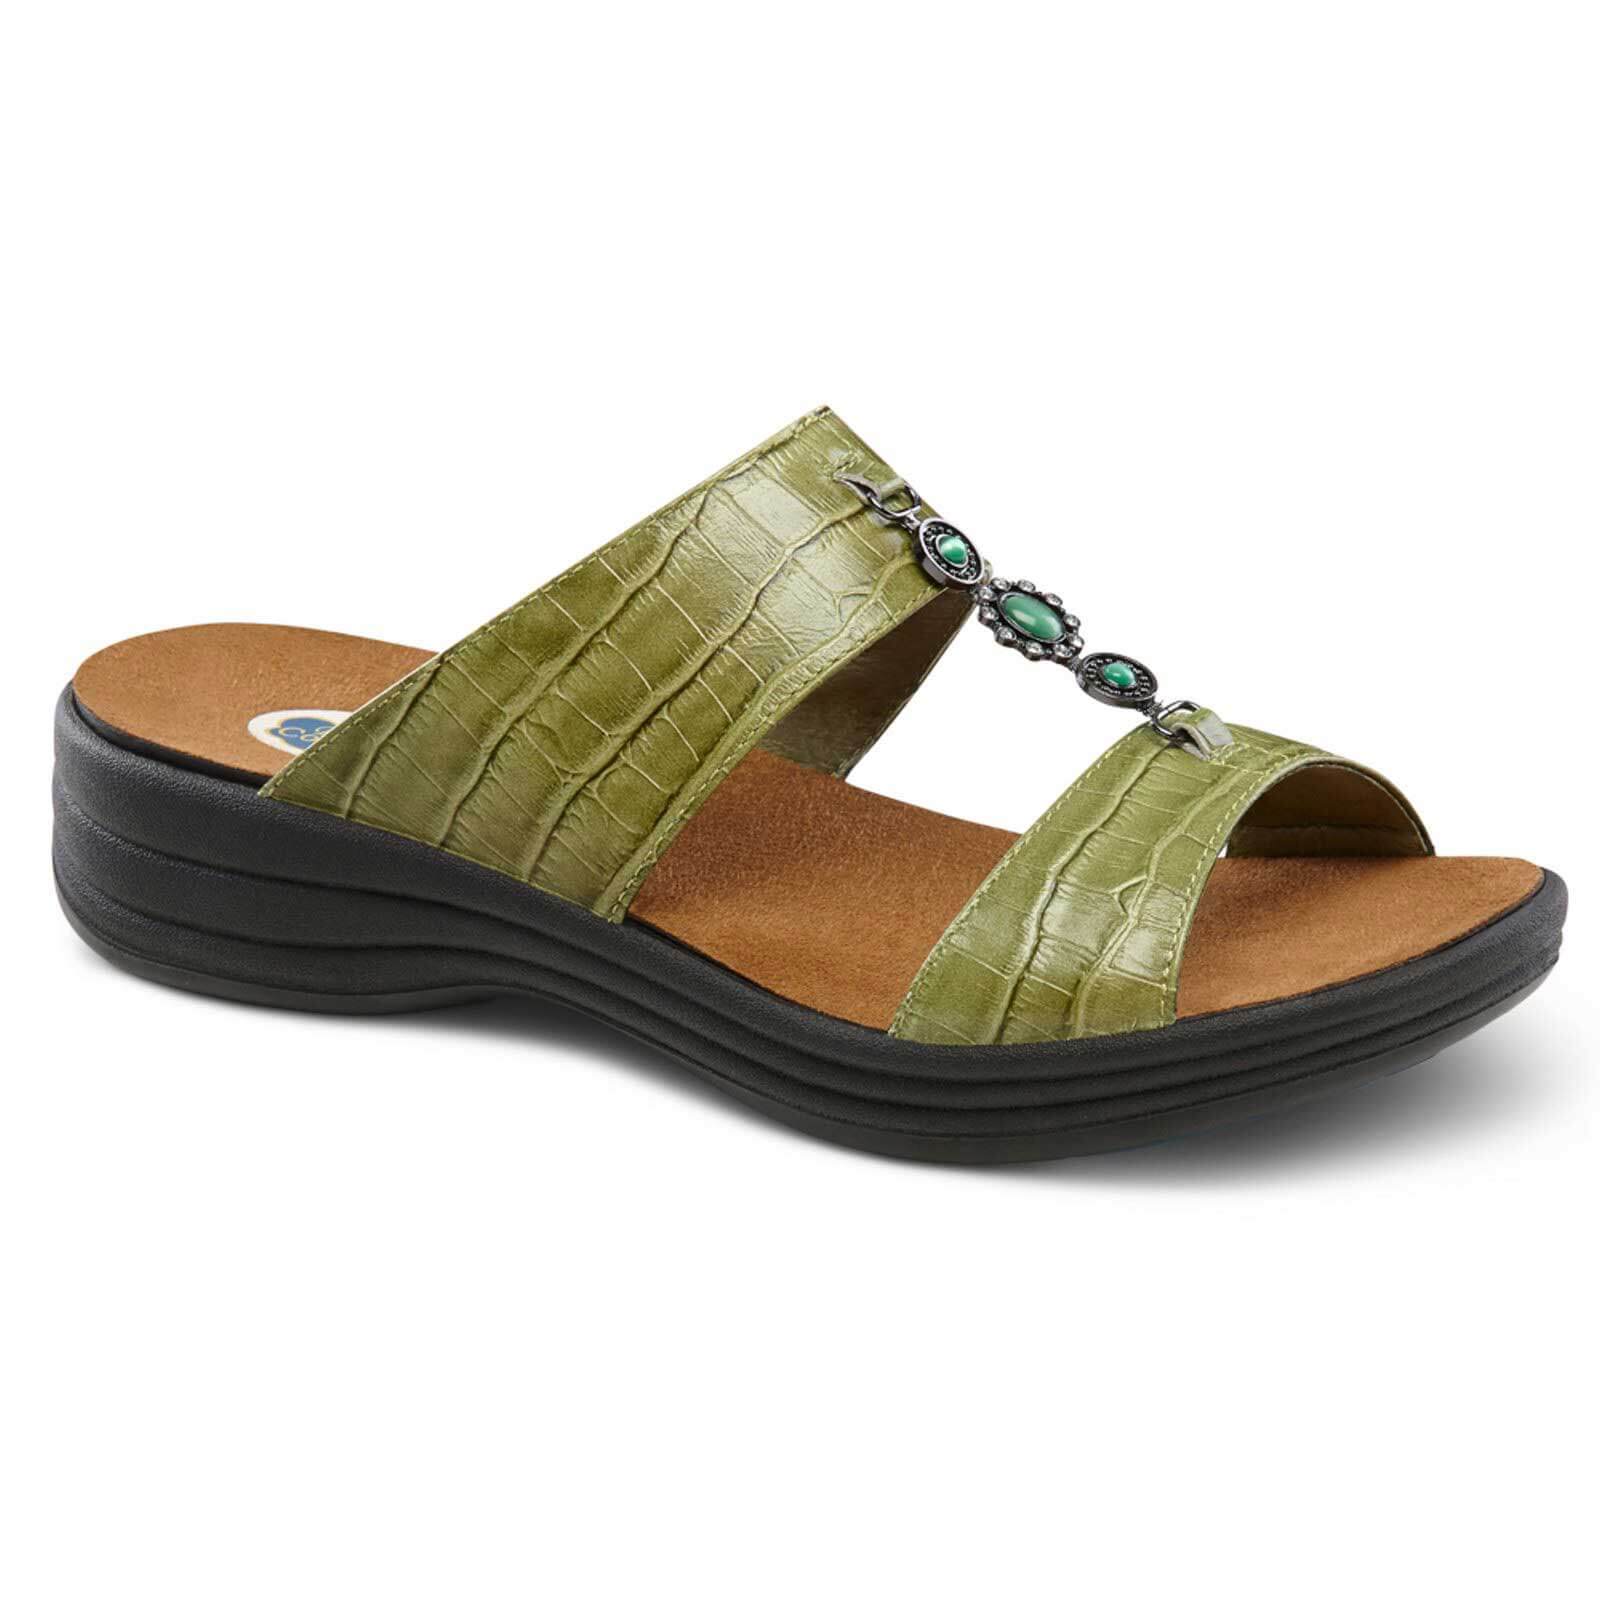 Dr. Comfort Sharon Women's Casual Sandal, Extra Wide